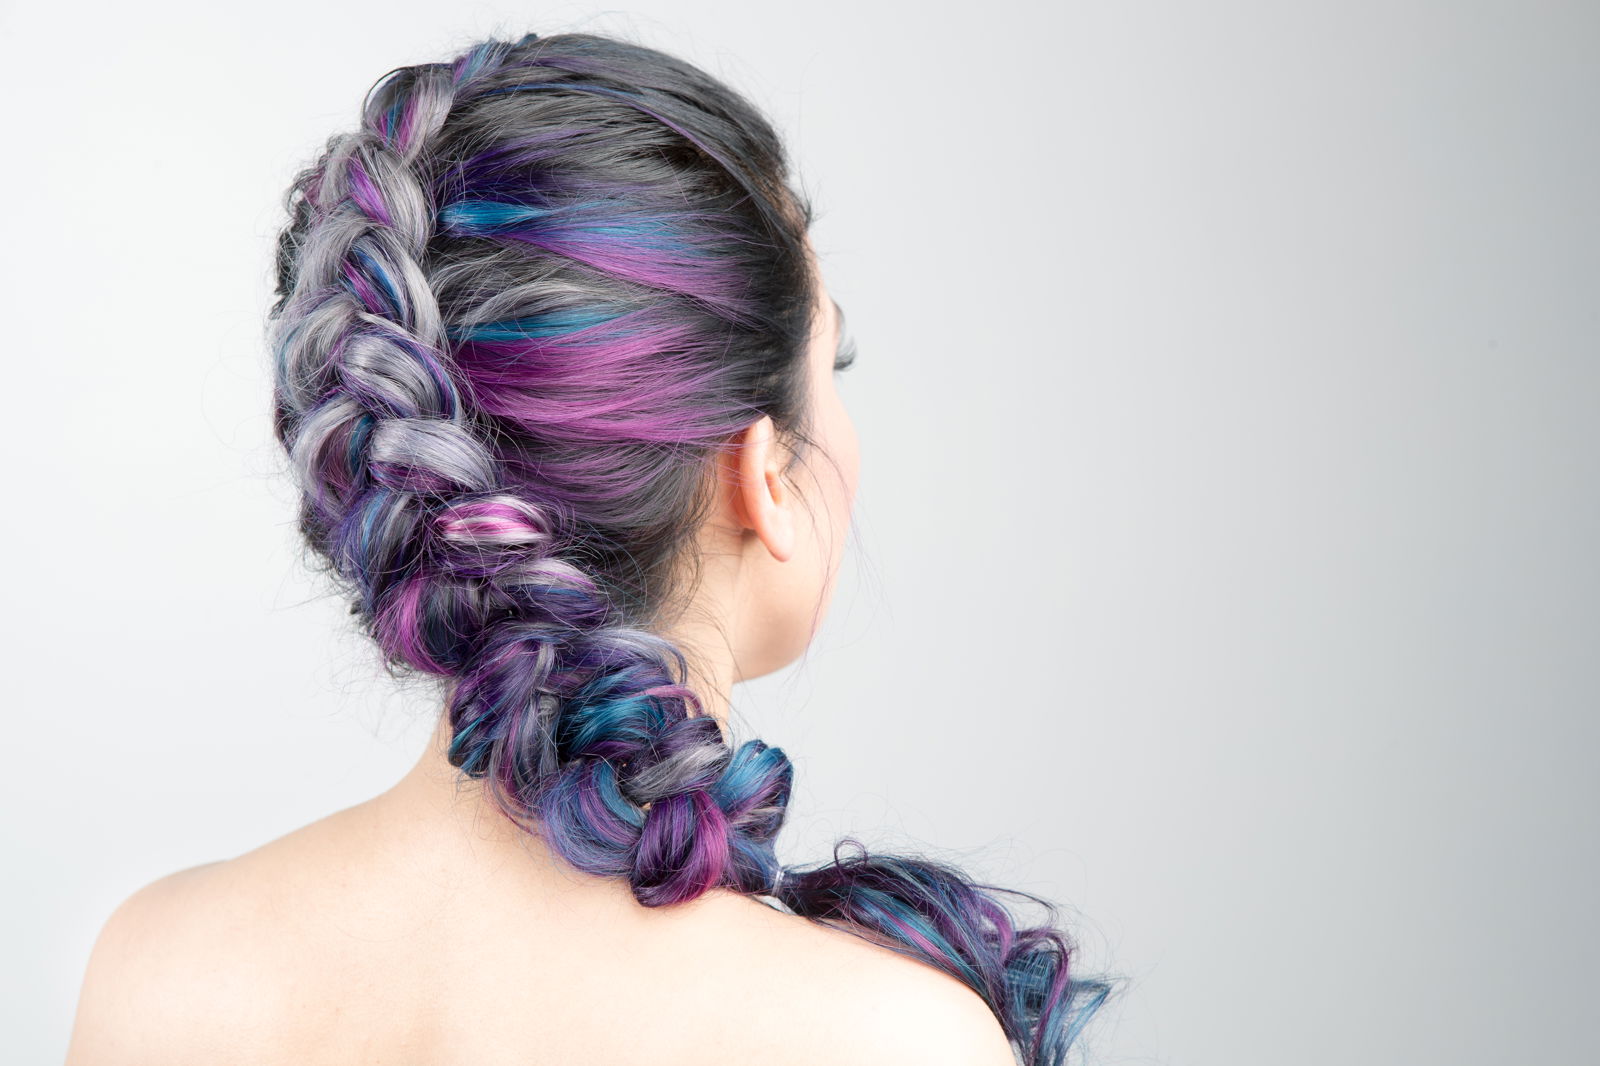 Back view of a long hair style swept up in a braid. Hair is mostly silver with blue and purple streaks mixed at the ends.